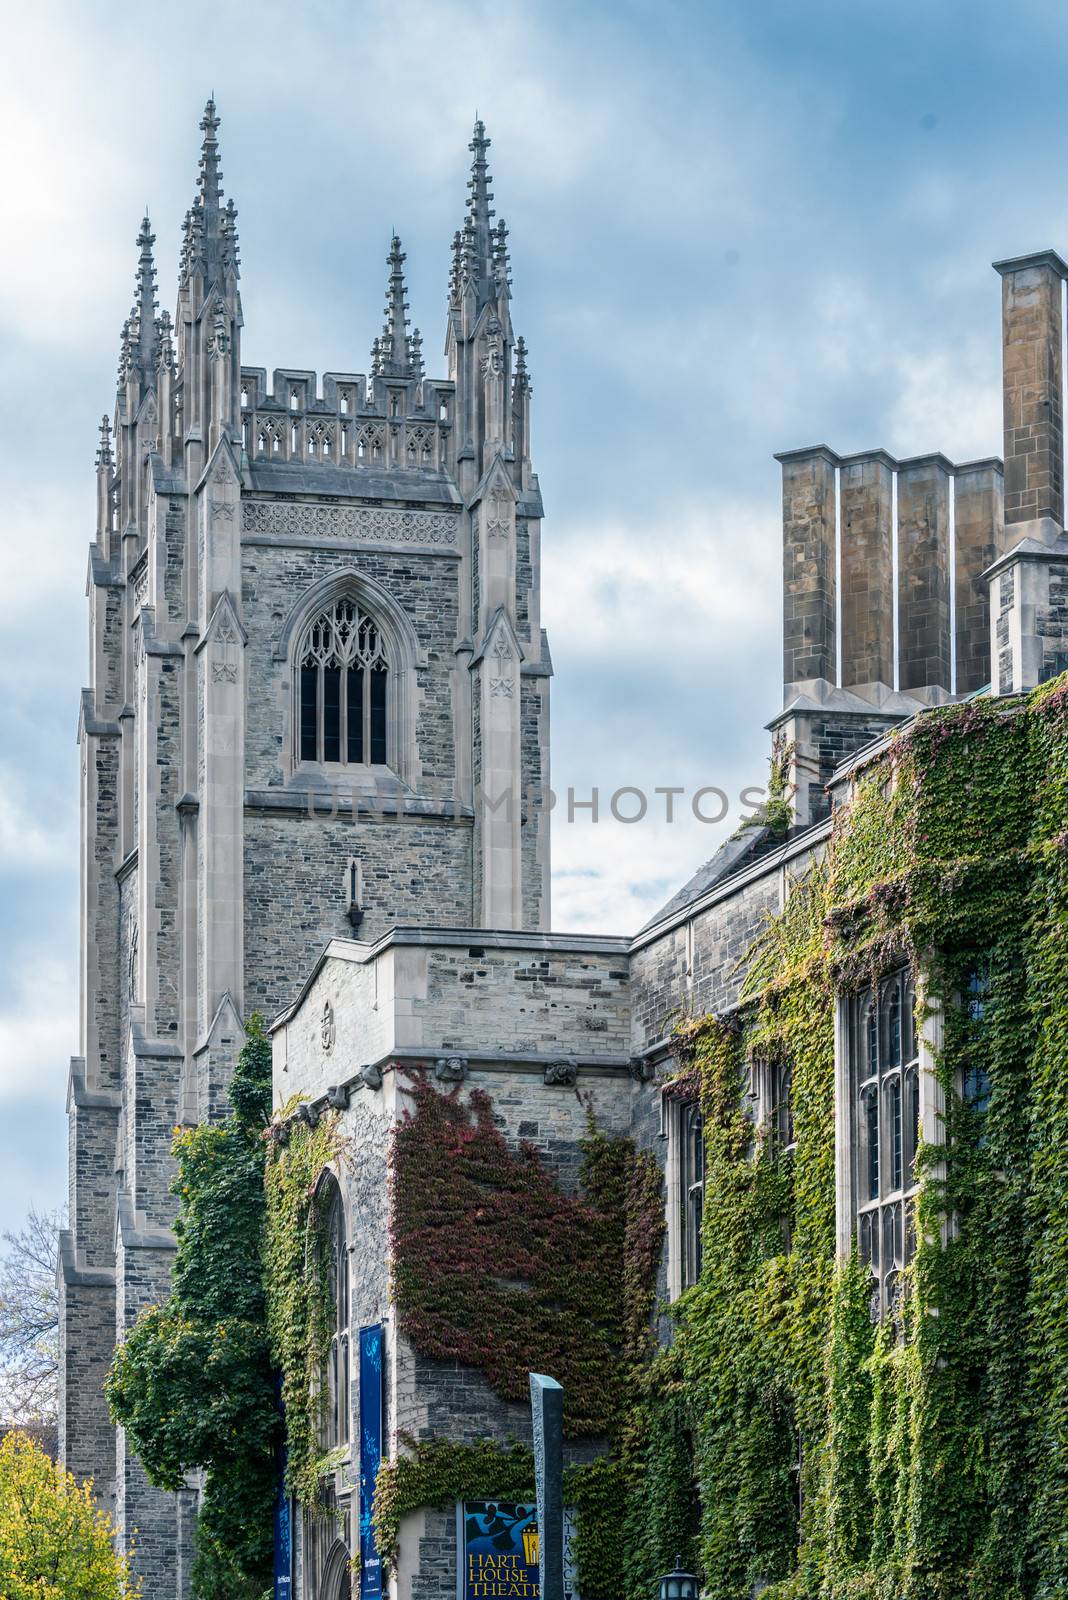 TORONTO, ON, CANADA - OCTOBER 22: Hart House at University of Toronto, in Toronto, ON, on October 22, 2013